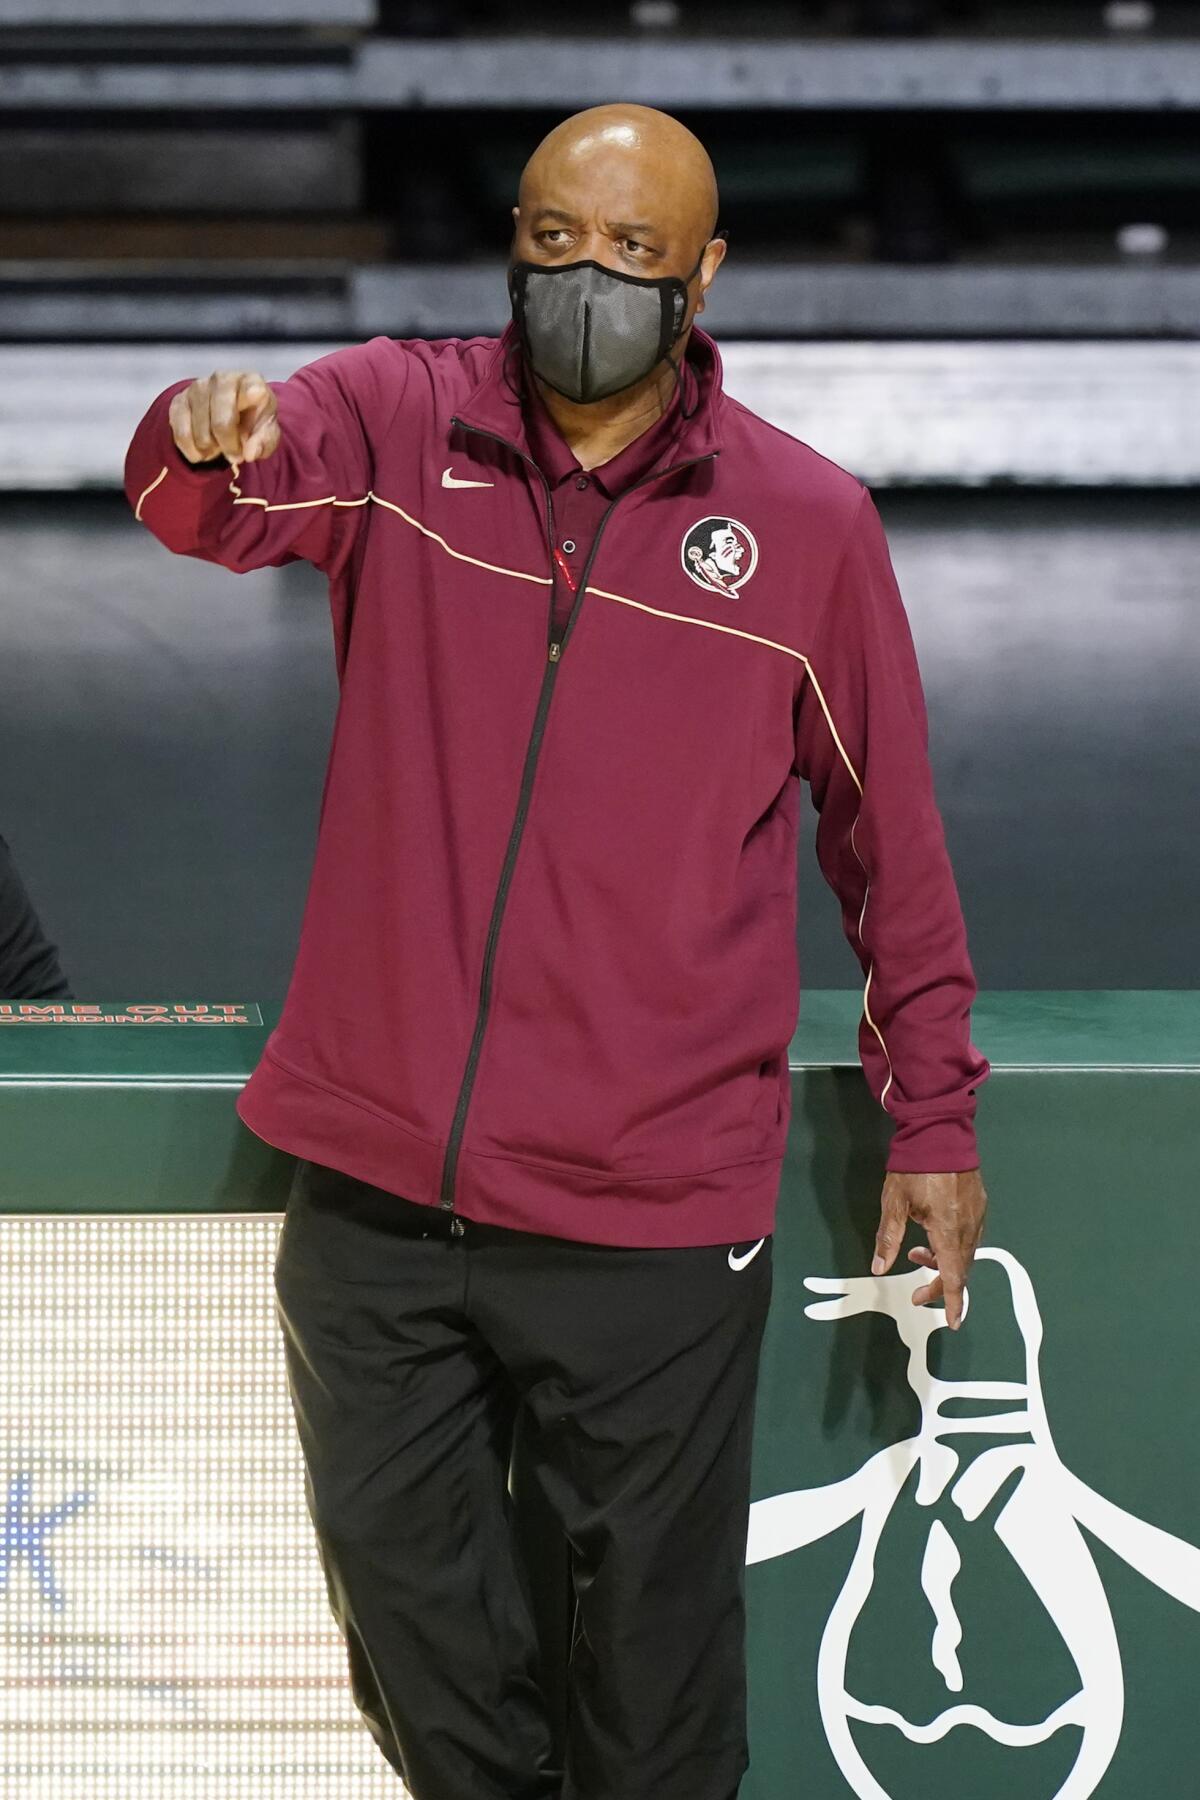 Florida State head coach Leonard Hamilton gestures during the second half of an NCAA college basketball game against Miami, Wednesday, Feb. 24, 2021, in Coral Gables, Fla. (AP Photo/Marta Lavandier)